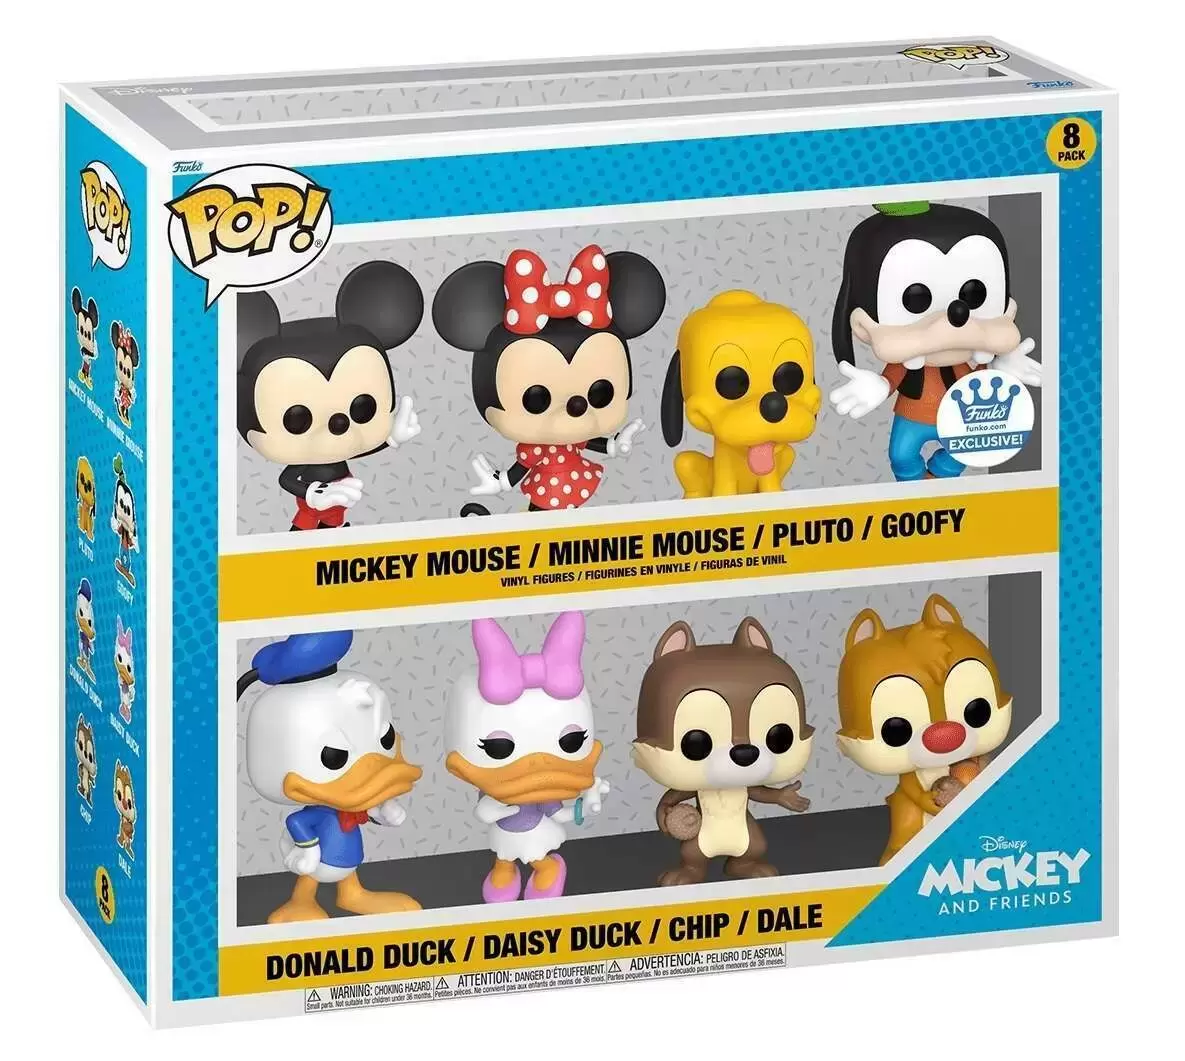 POP! Disney - Mickey and Friends 8 Pack